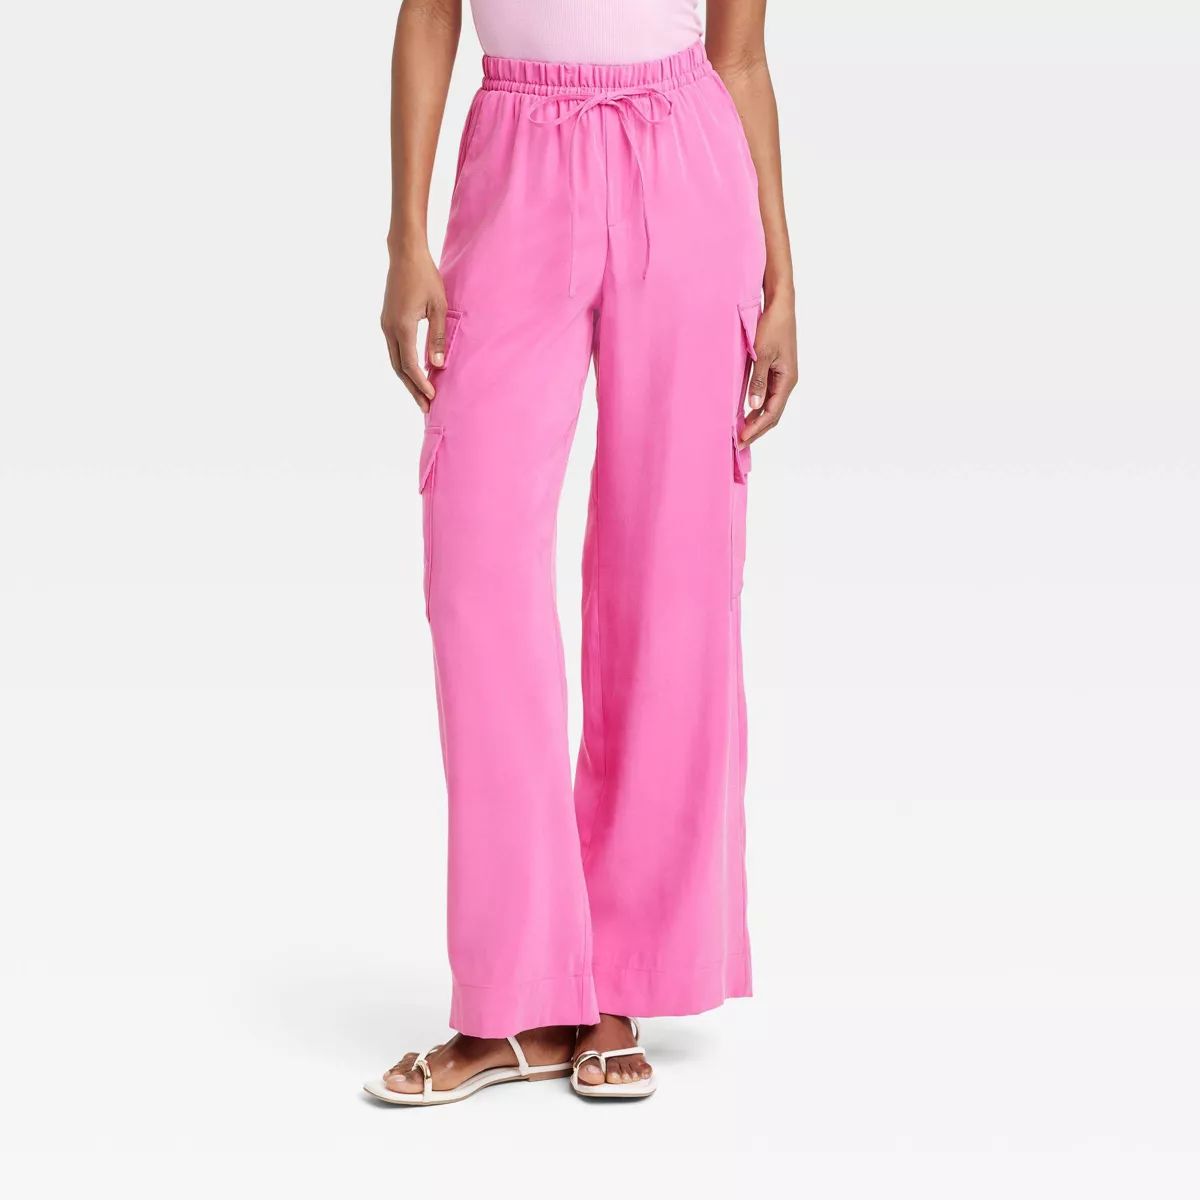 Women's High-Rise Wide Leg Cargo Pants - A New Day™ Hot Pink S | Target